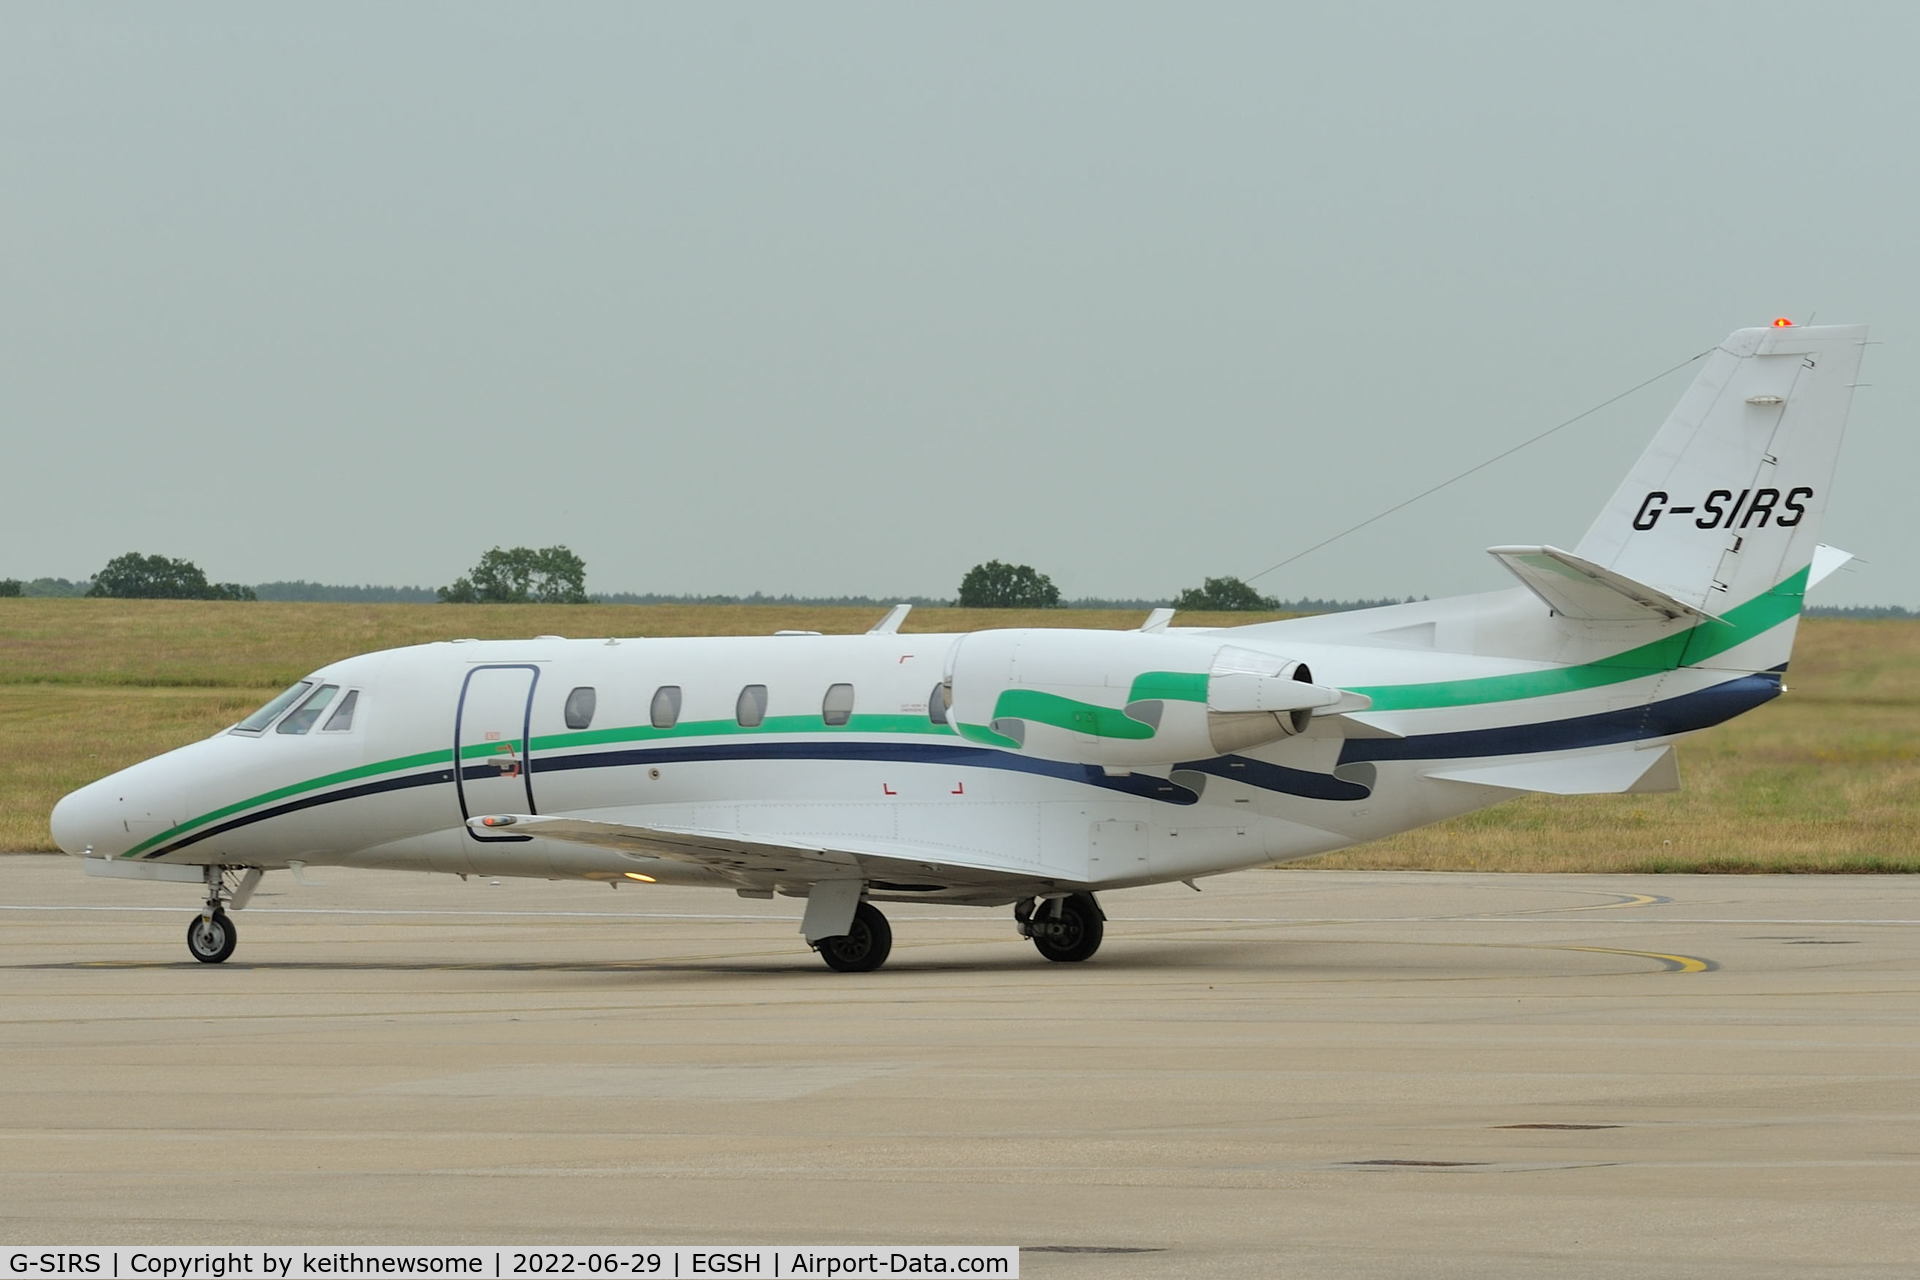 G-SIRS, 2001 Cessna 560XL Citation Excel C/N 560-5185, Arriving at Norwich from Edinburgh.